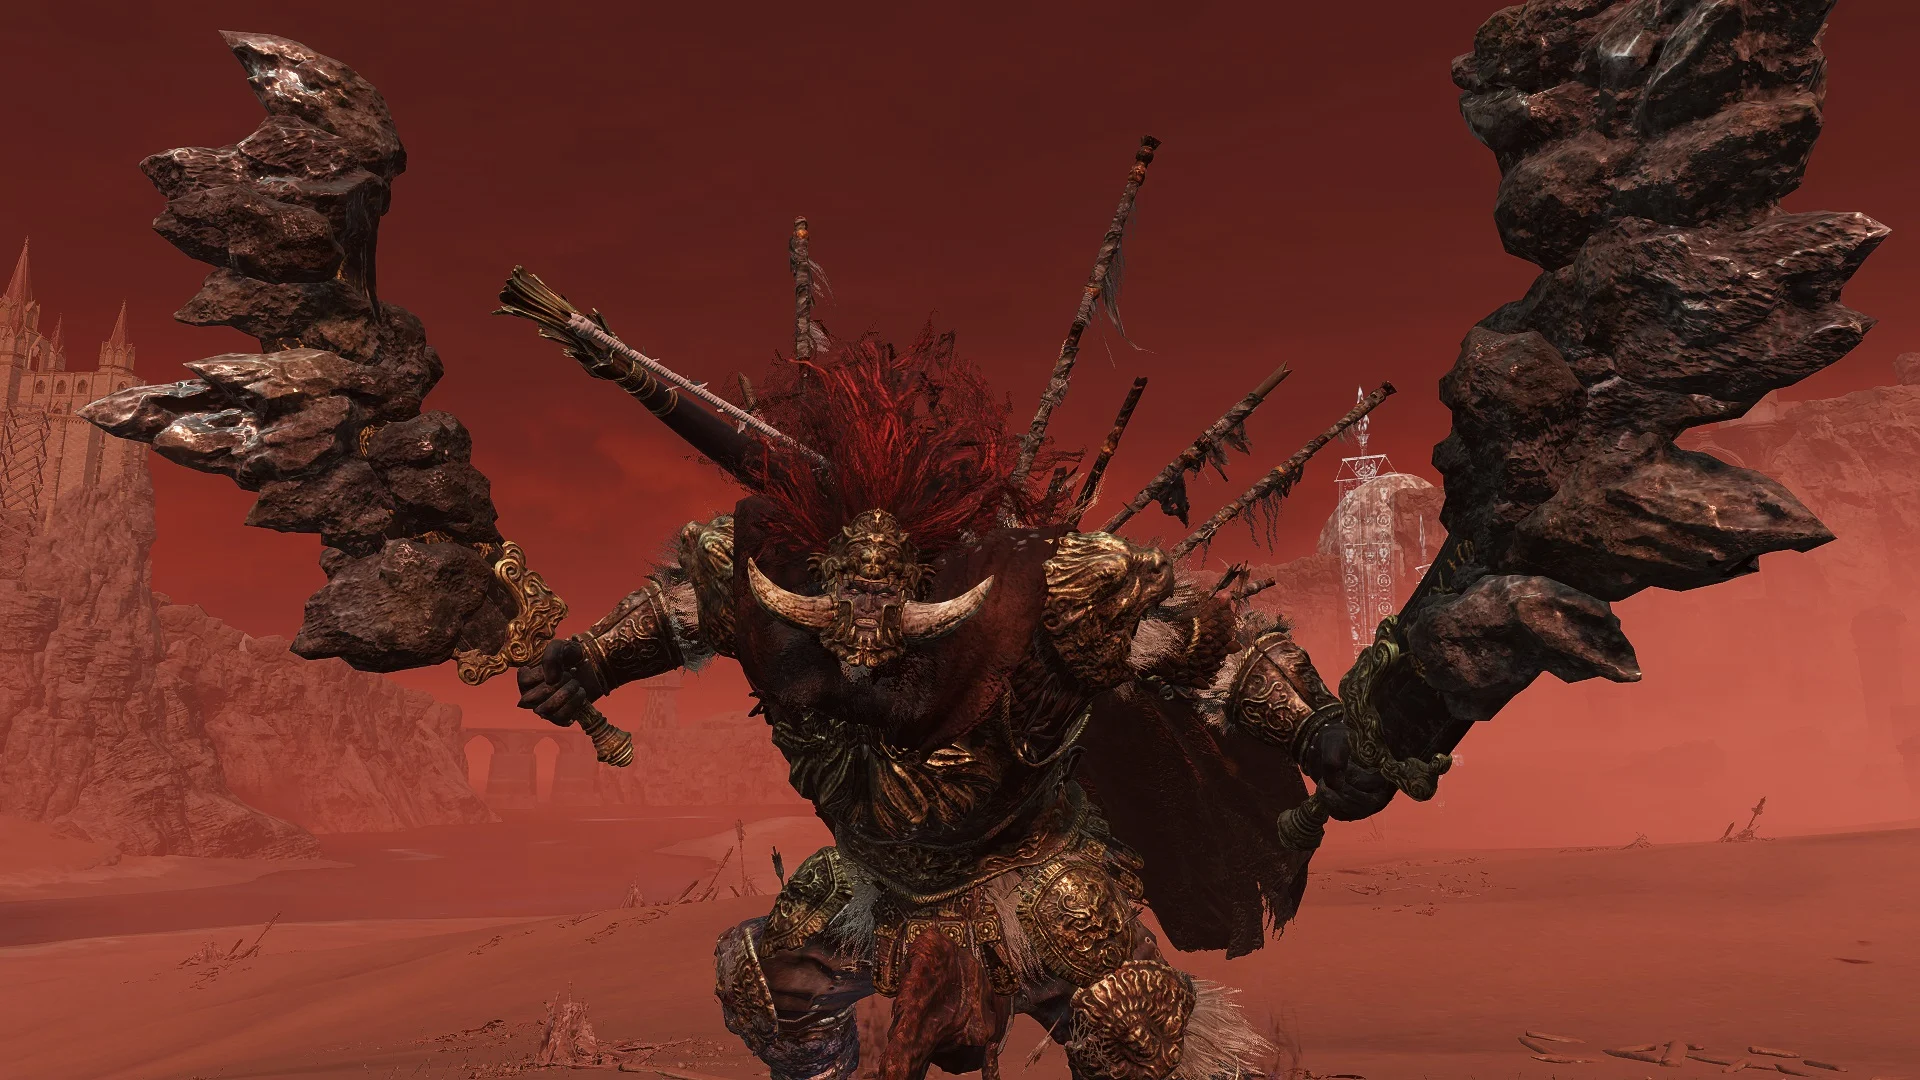 The 100 Hardest Video Game Bosses, Ranked By Difficulty